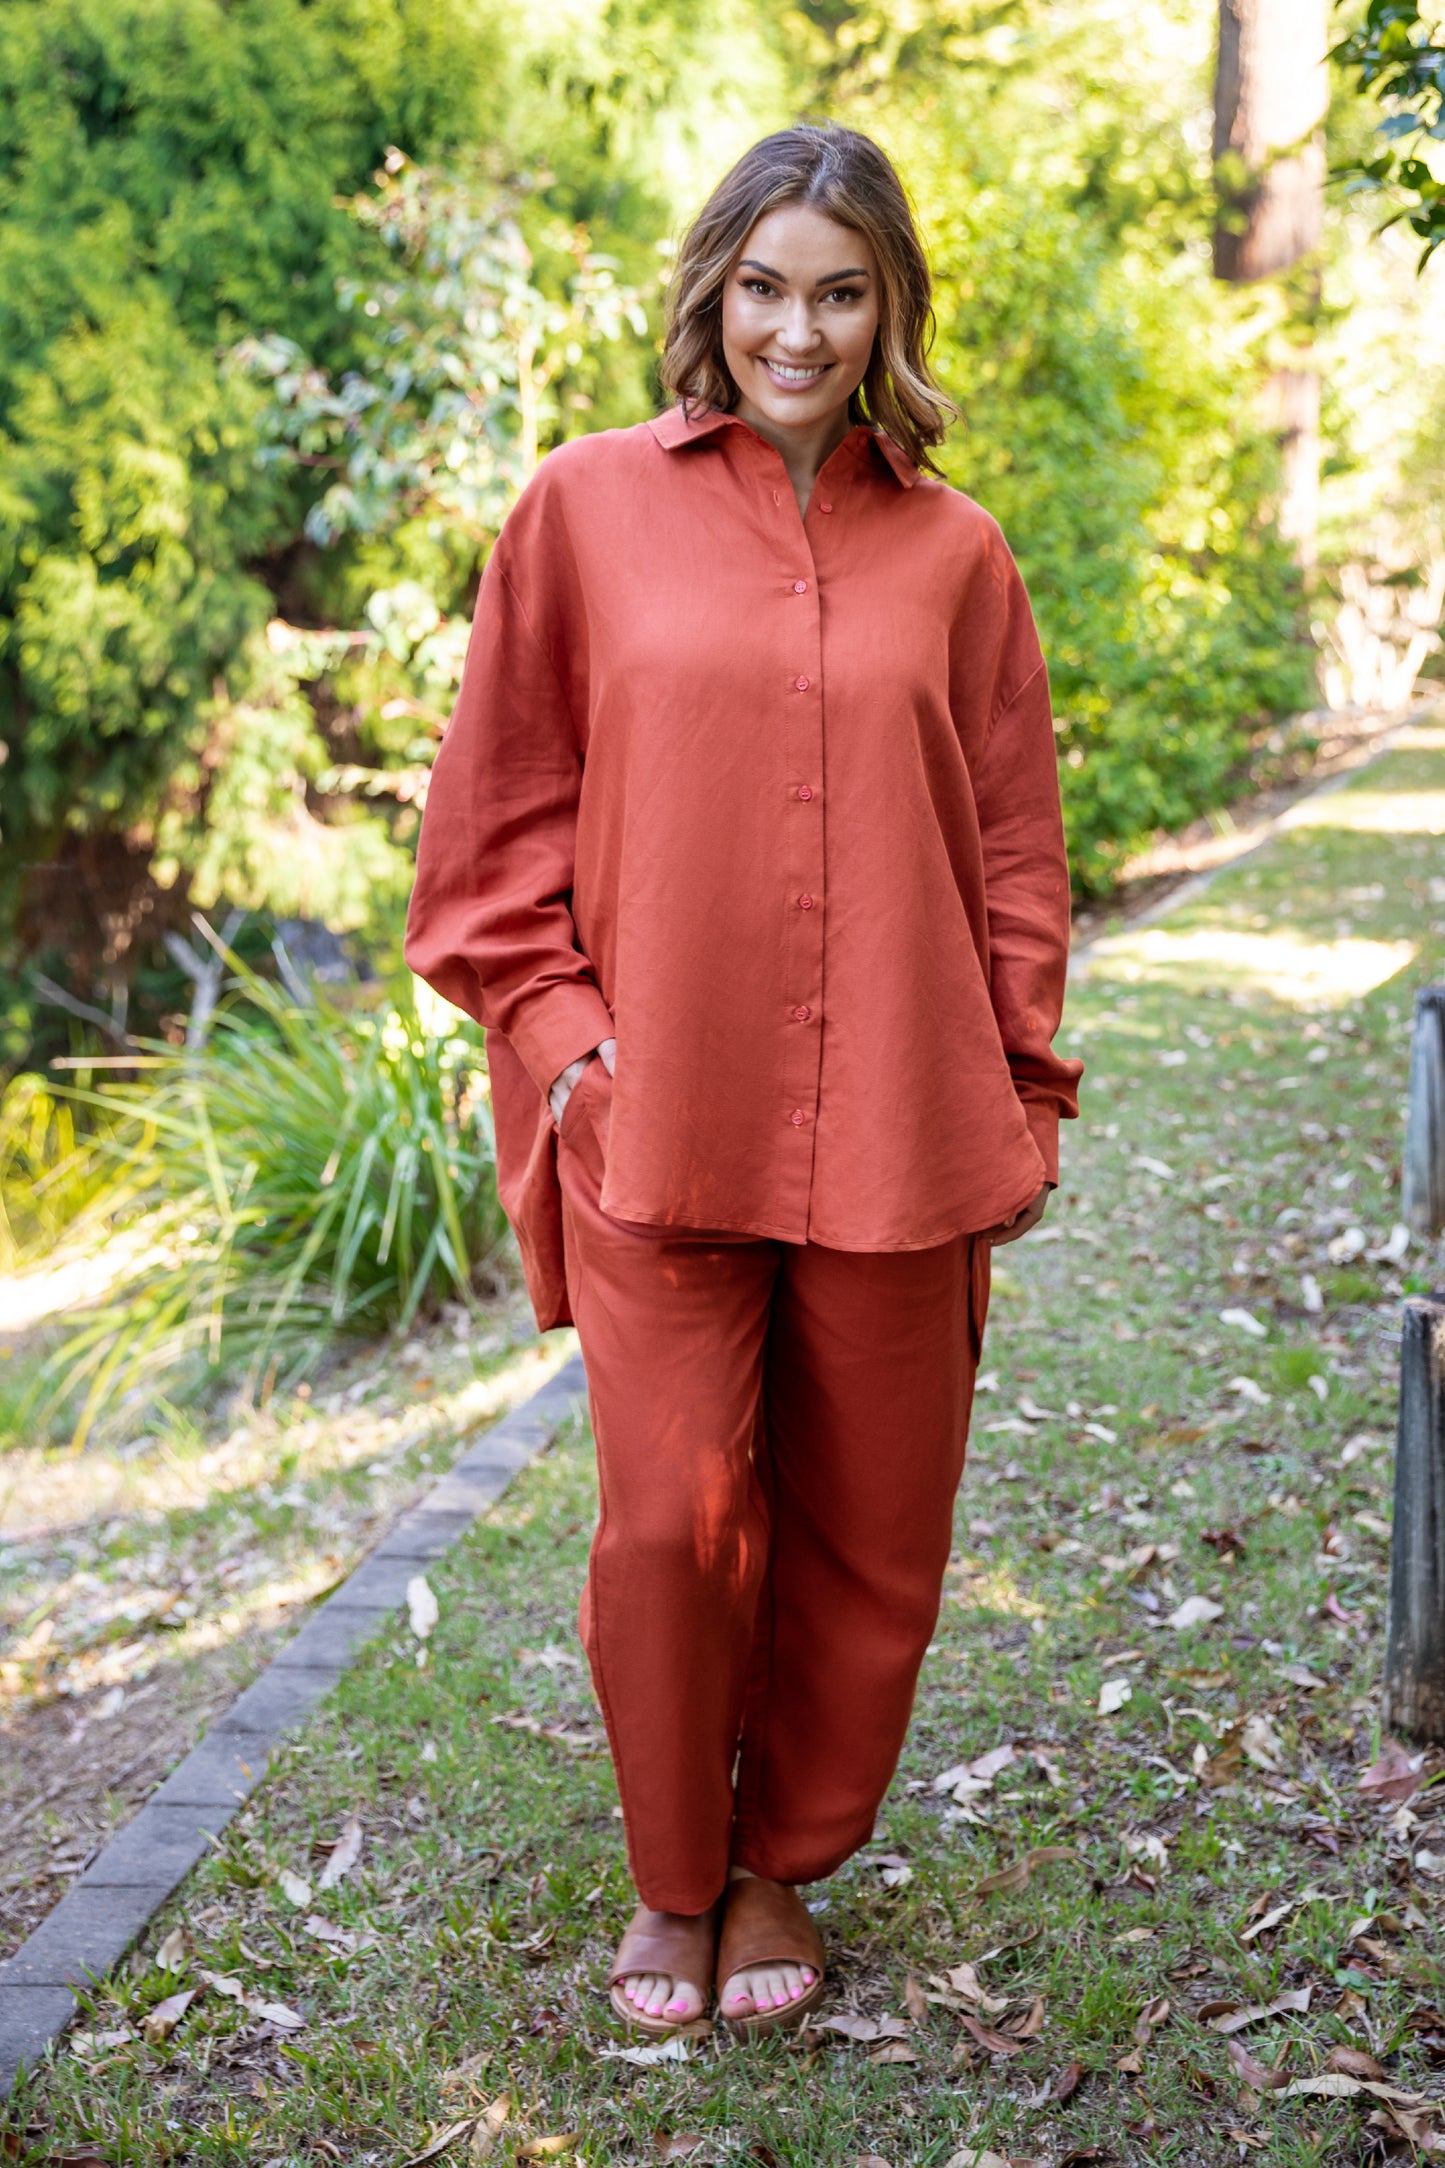 Amore Shirt in Terracotta